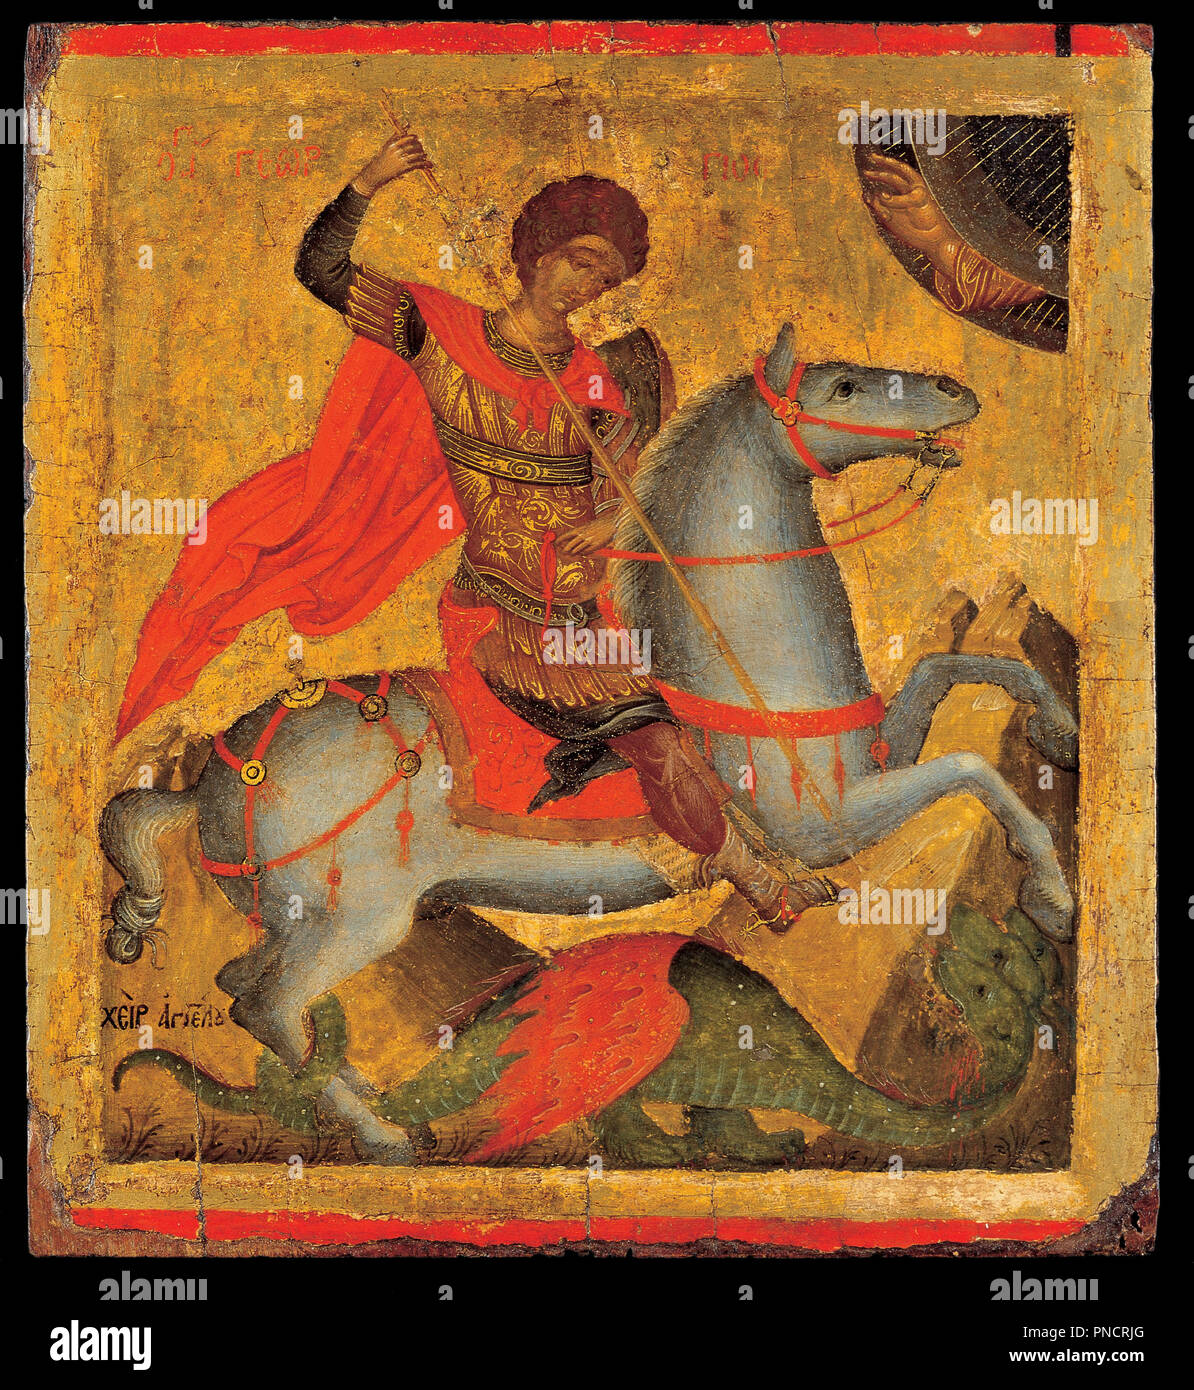 St George on Horseback, Slaying the Dragon. Date/Period: 1425 - 1450. Icon. Height: 408 mm (16.06 in); Width: 375 mm (14.76 in). Author: chanter Angelos Akotandos. Akotandos, Angelos. Stock Photo